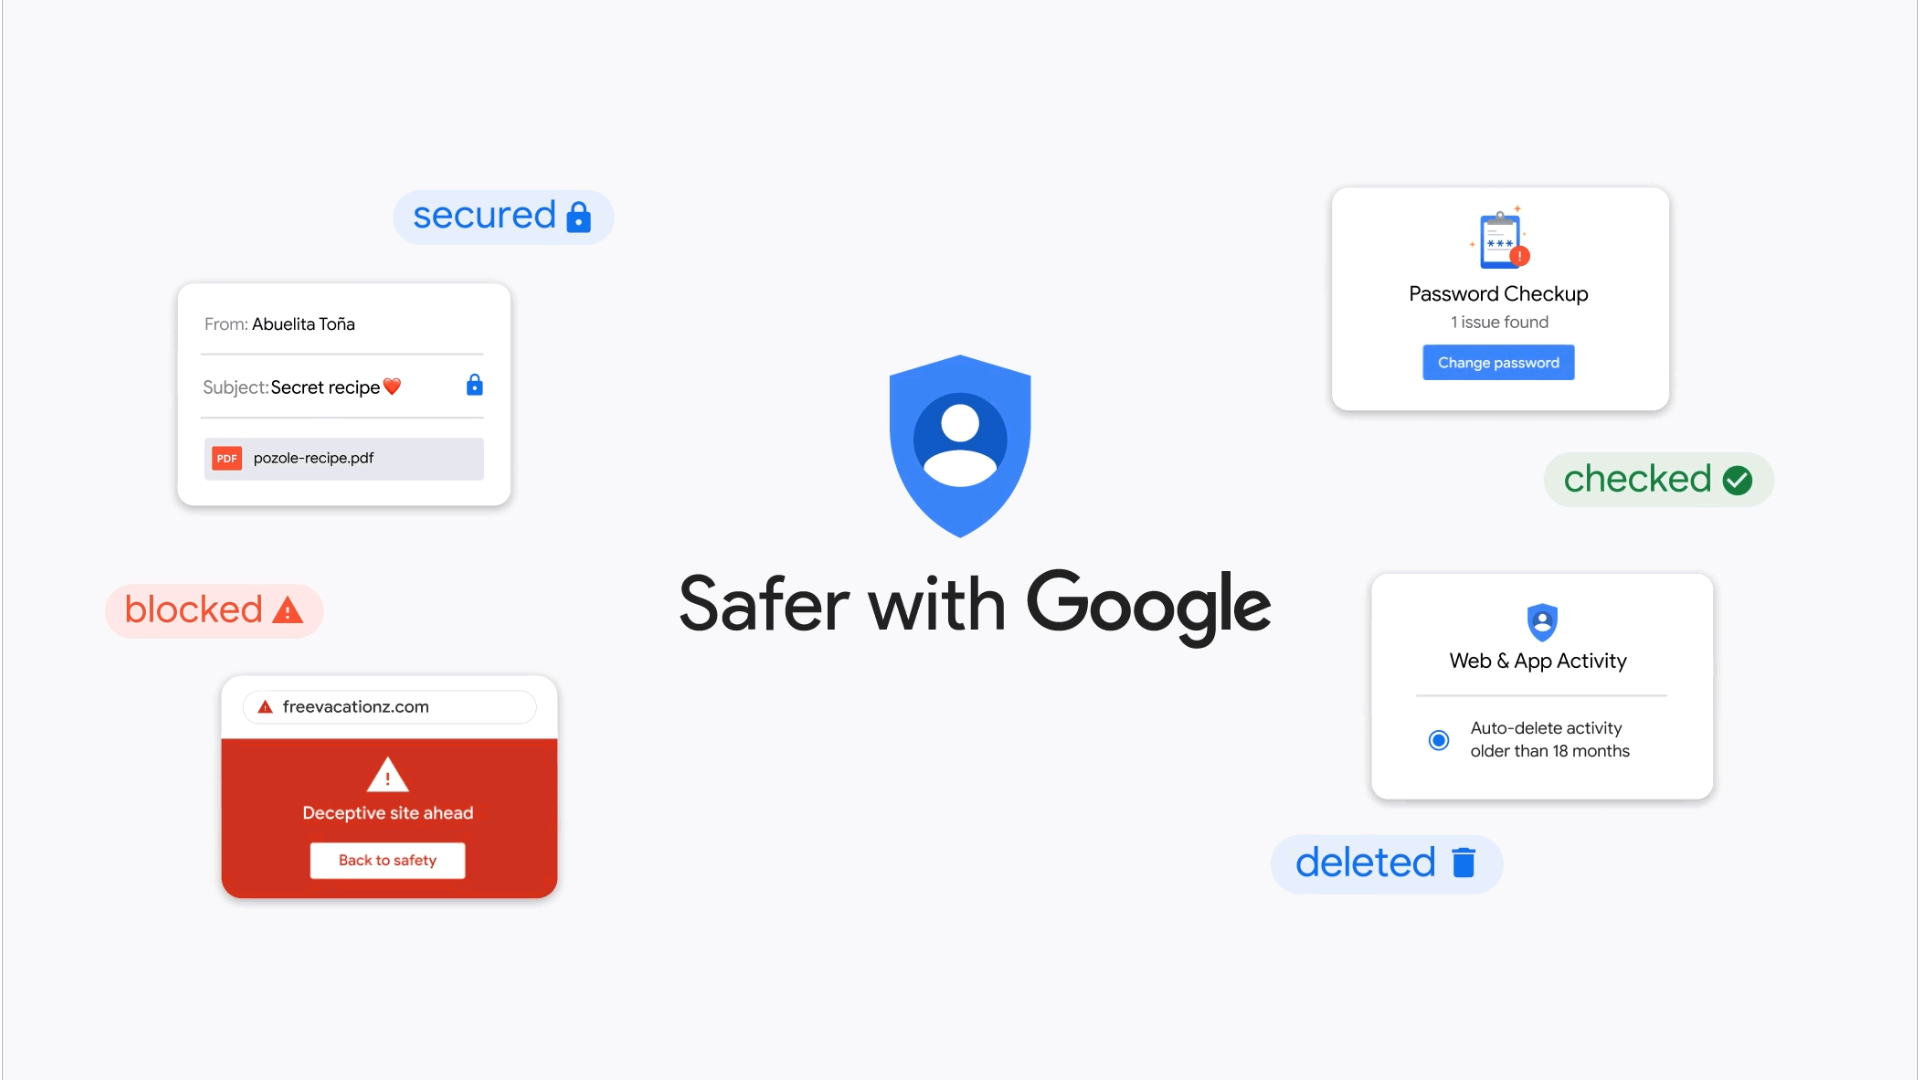 safer-with-google